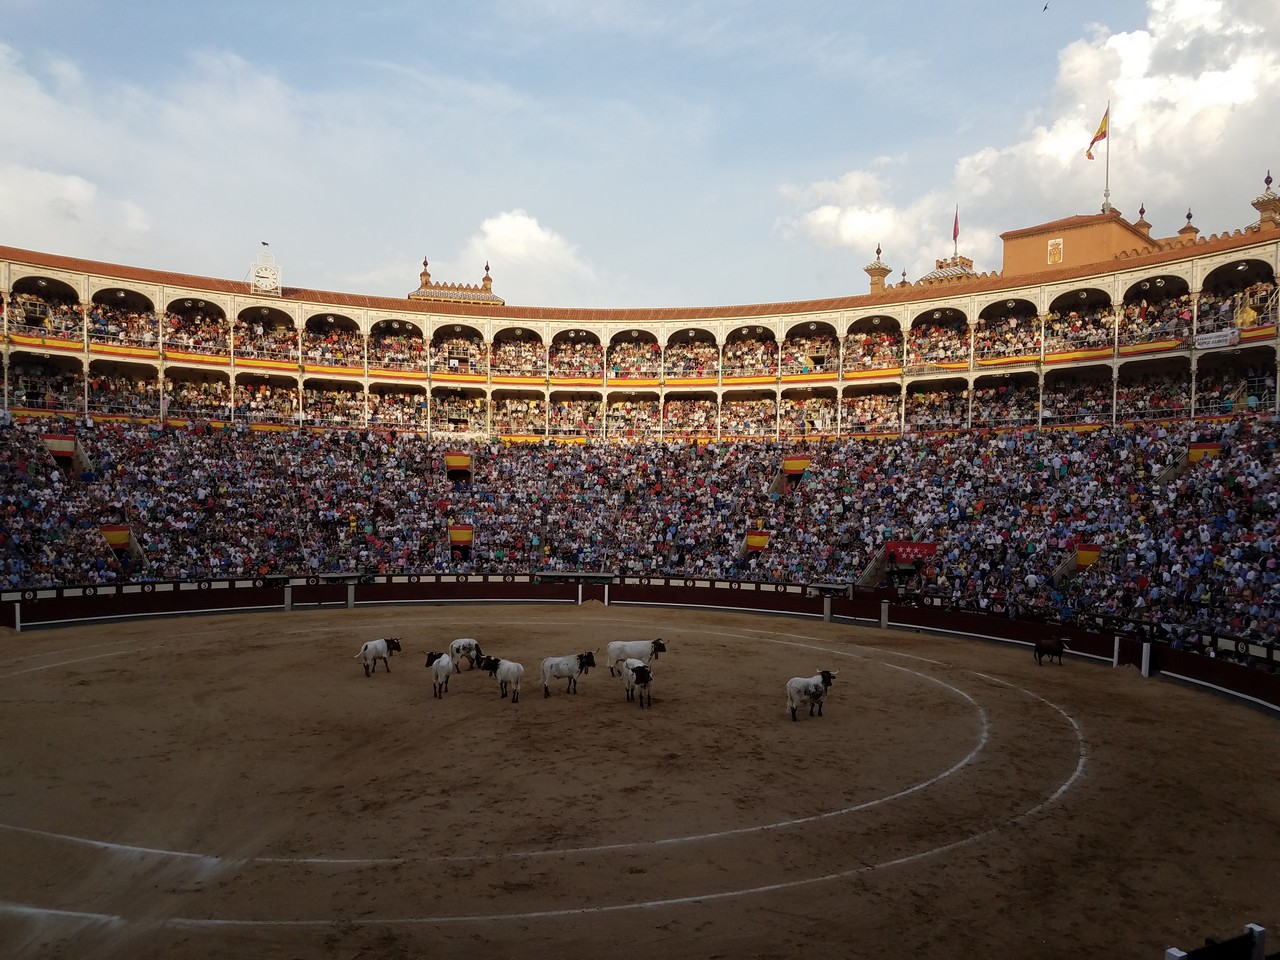 a crowd of people in a stadium with a round arena with cows